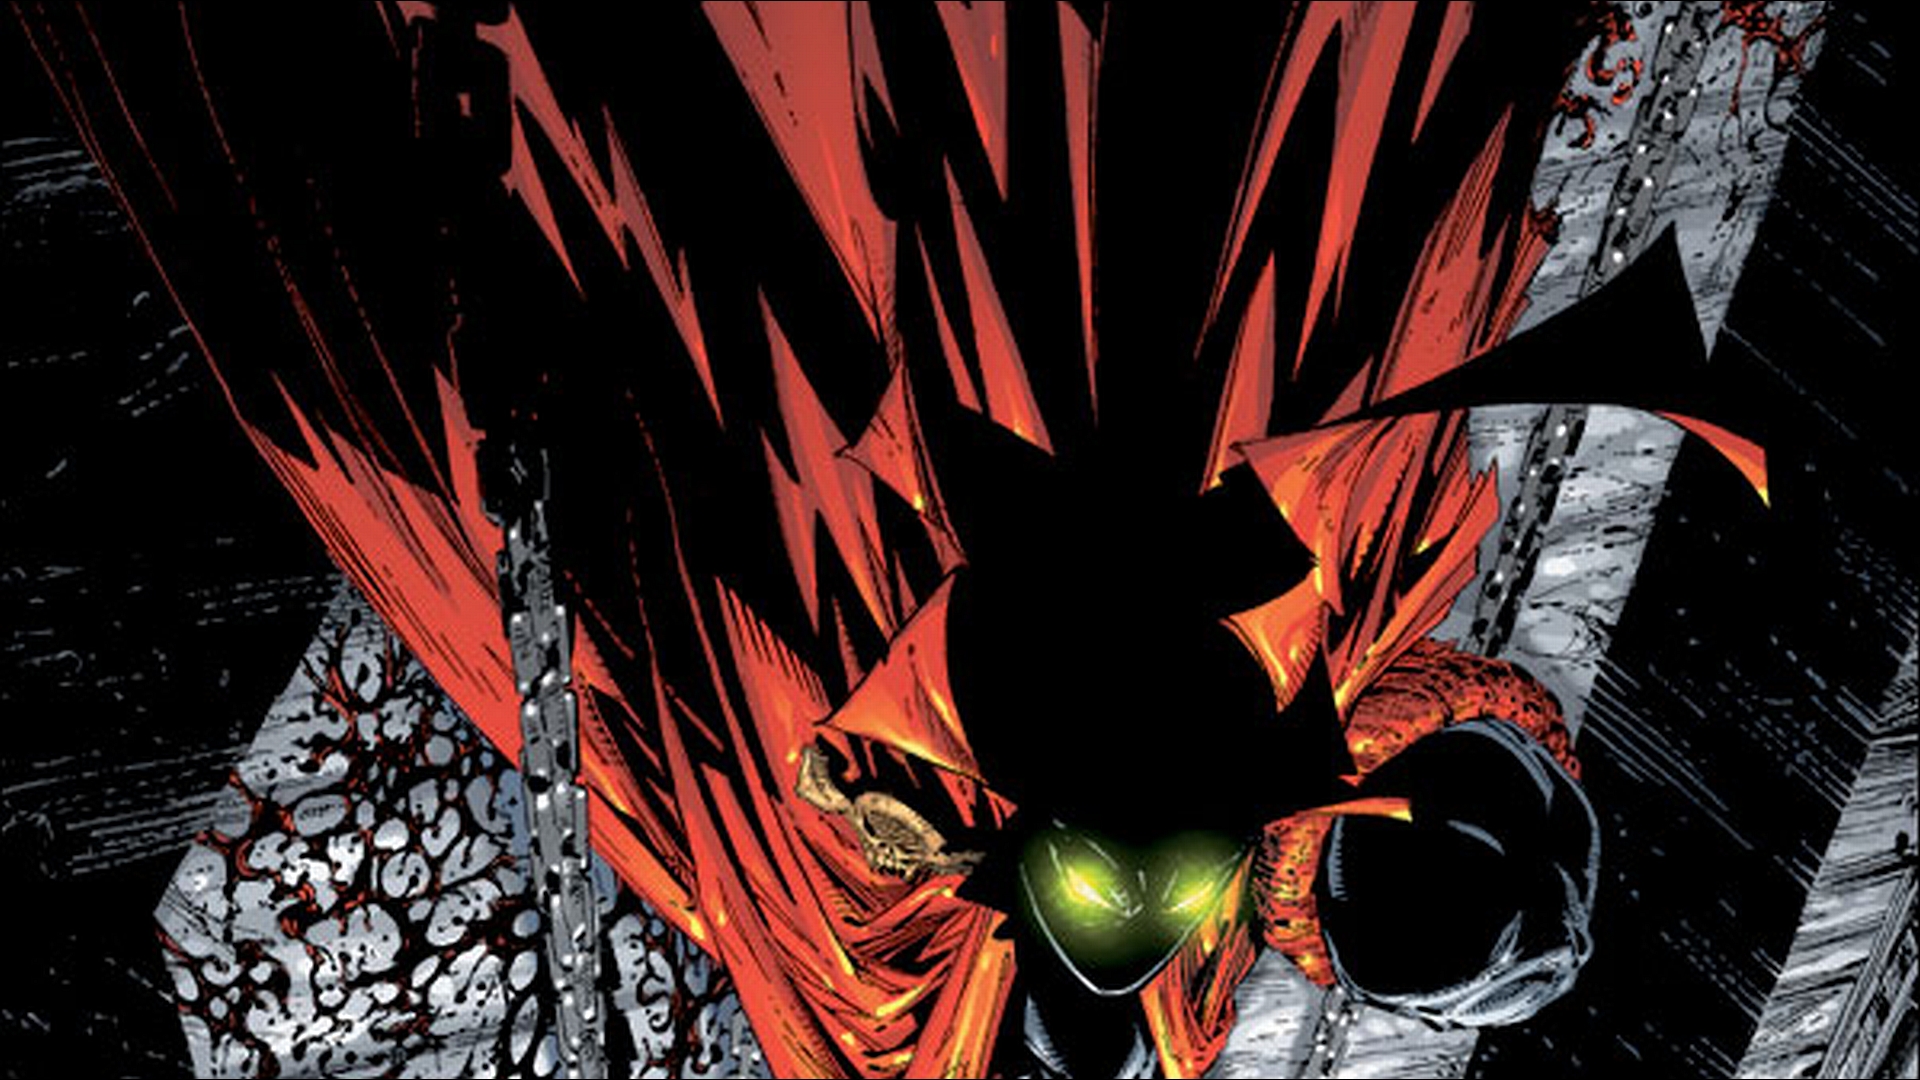 Download mobile wallpaper Spawn, Comics for free.